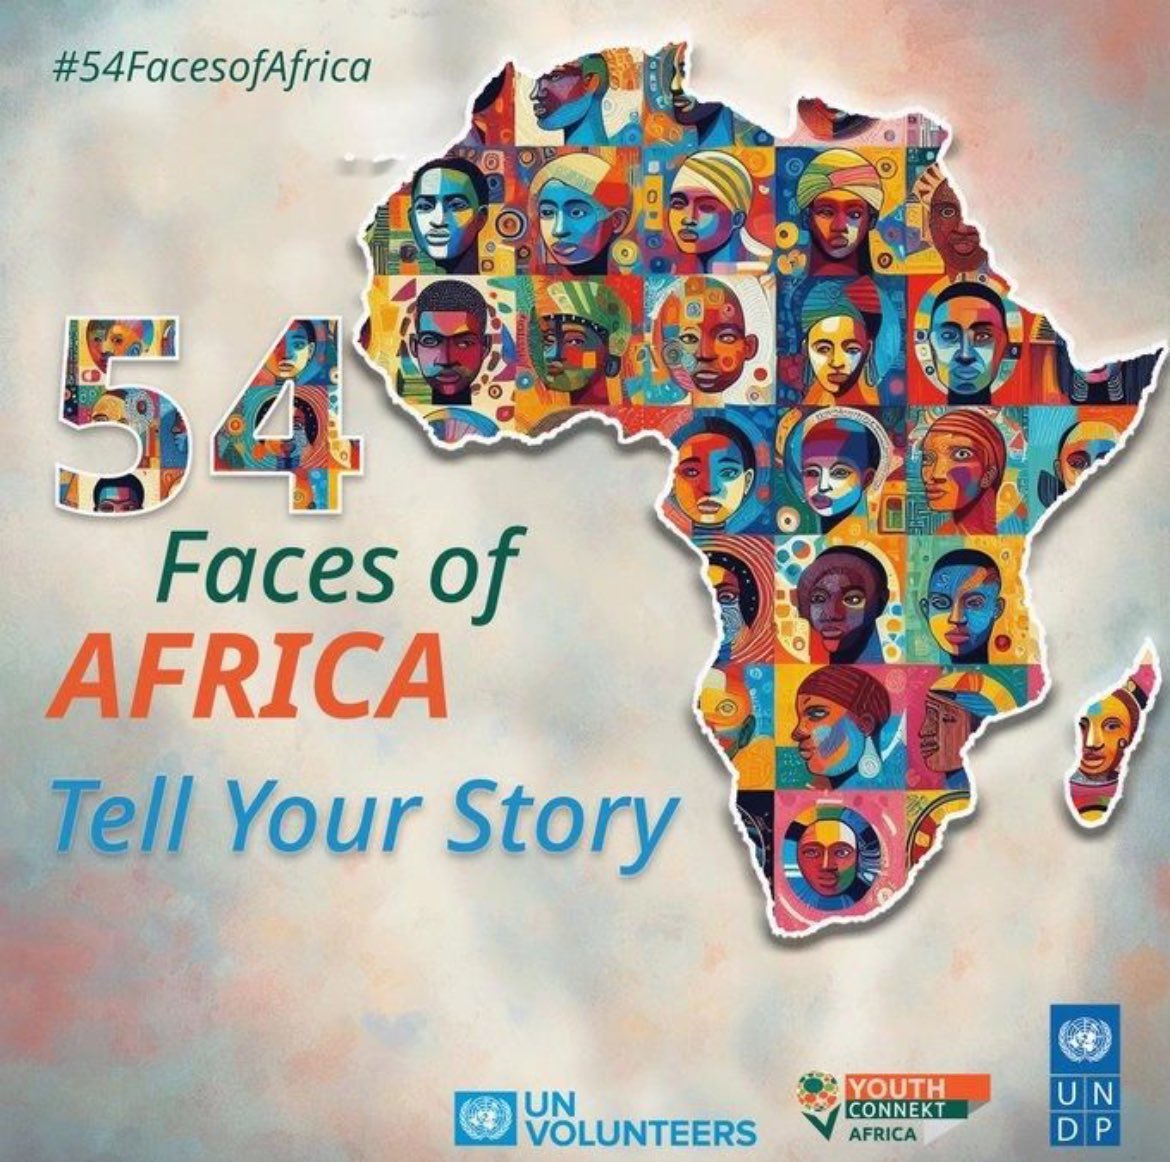 #YouthConnektAfricaSummit2023 is just 6 days from now!

Calling all African youths aged 18-35 to participate #54FacesofAfrica initiative! Contribute your distinct narrative on 'What it means to be African' through a photo, video, or a 500-word article via 54facesaafrica@gmail.com